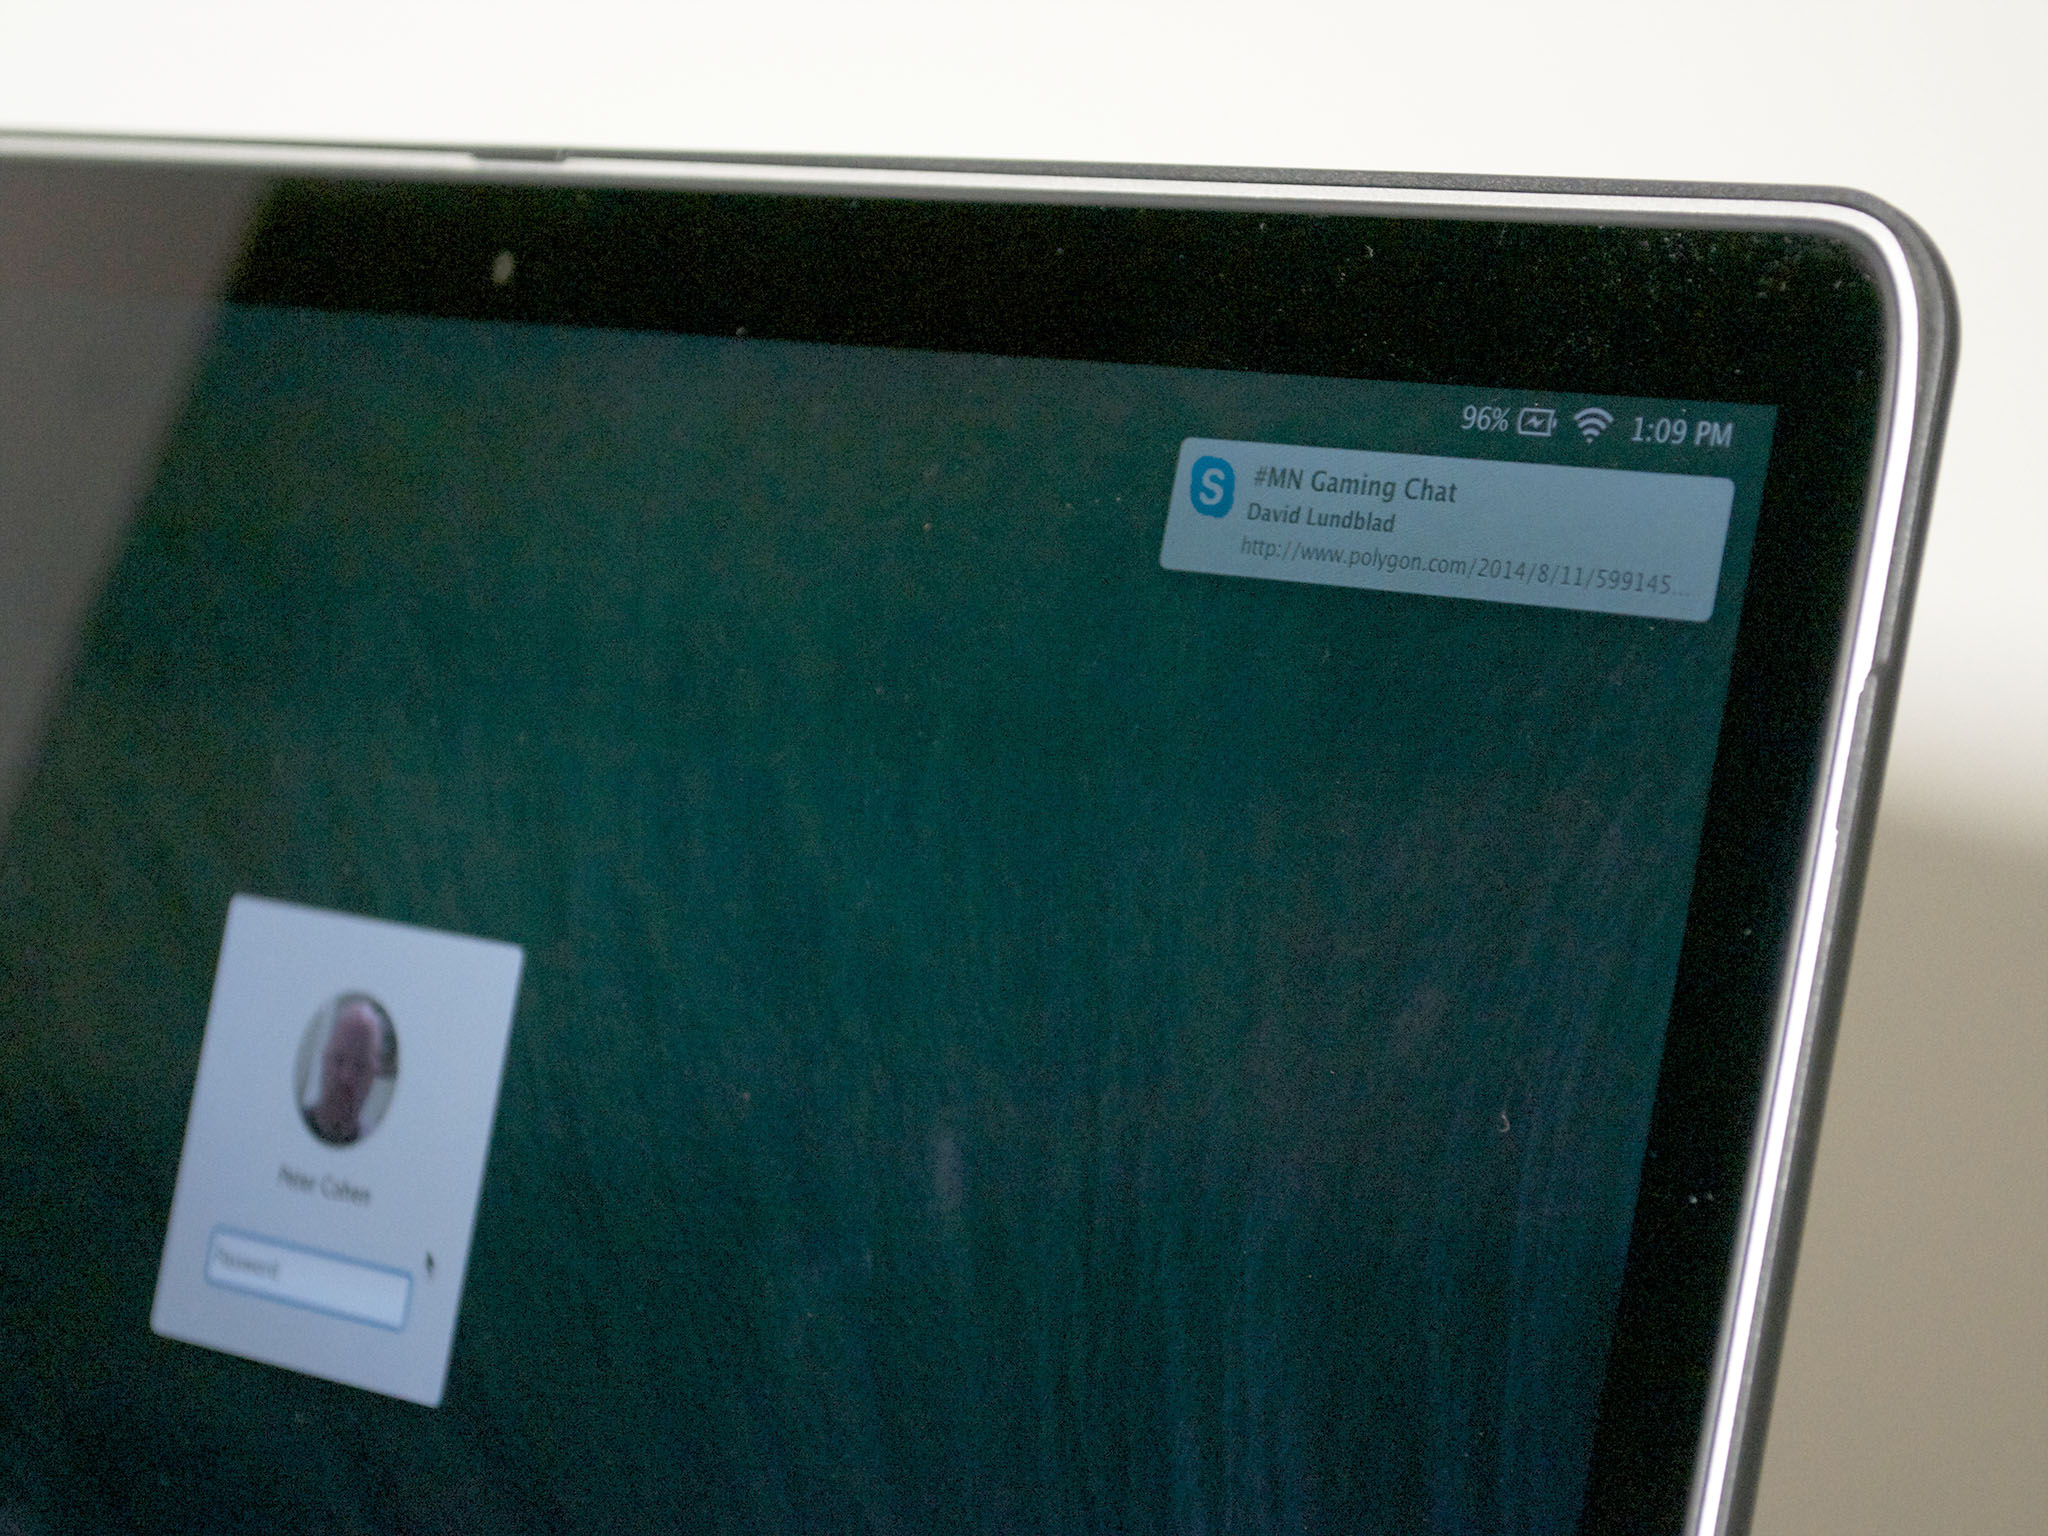 Lock screen notifications in OS X Mavericks, and how to turn them off